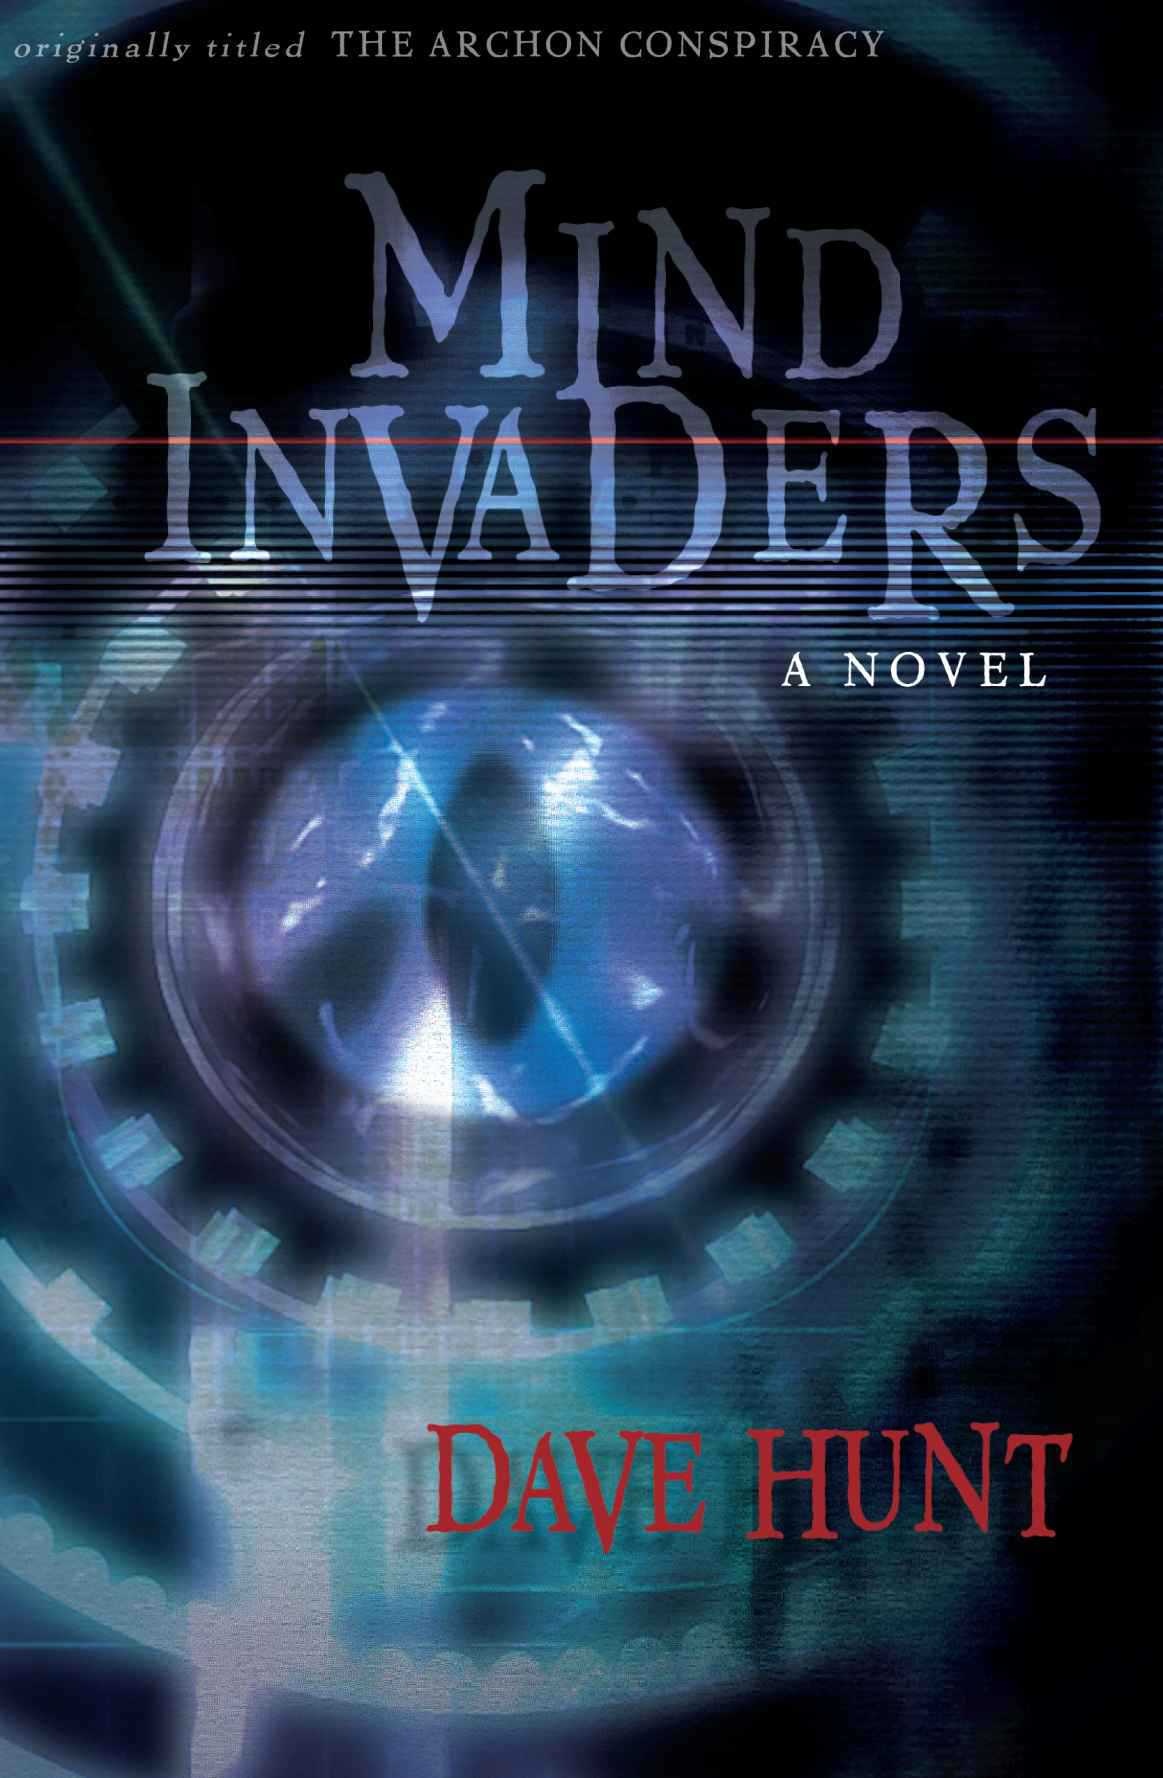 The Mind Invaders